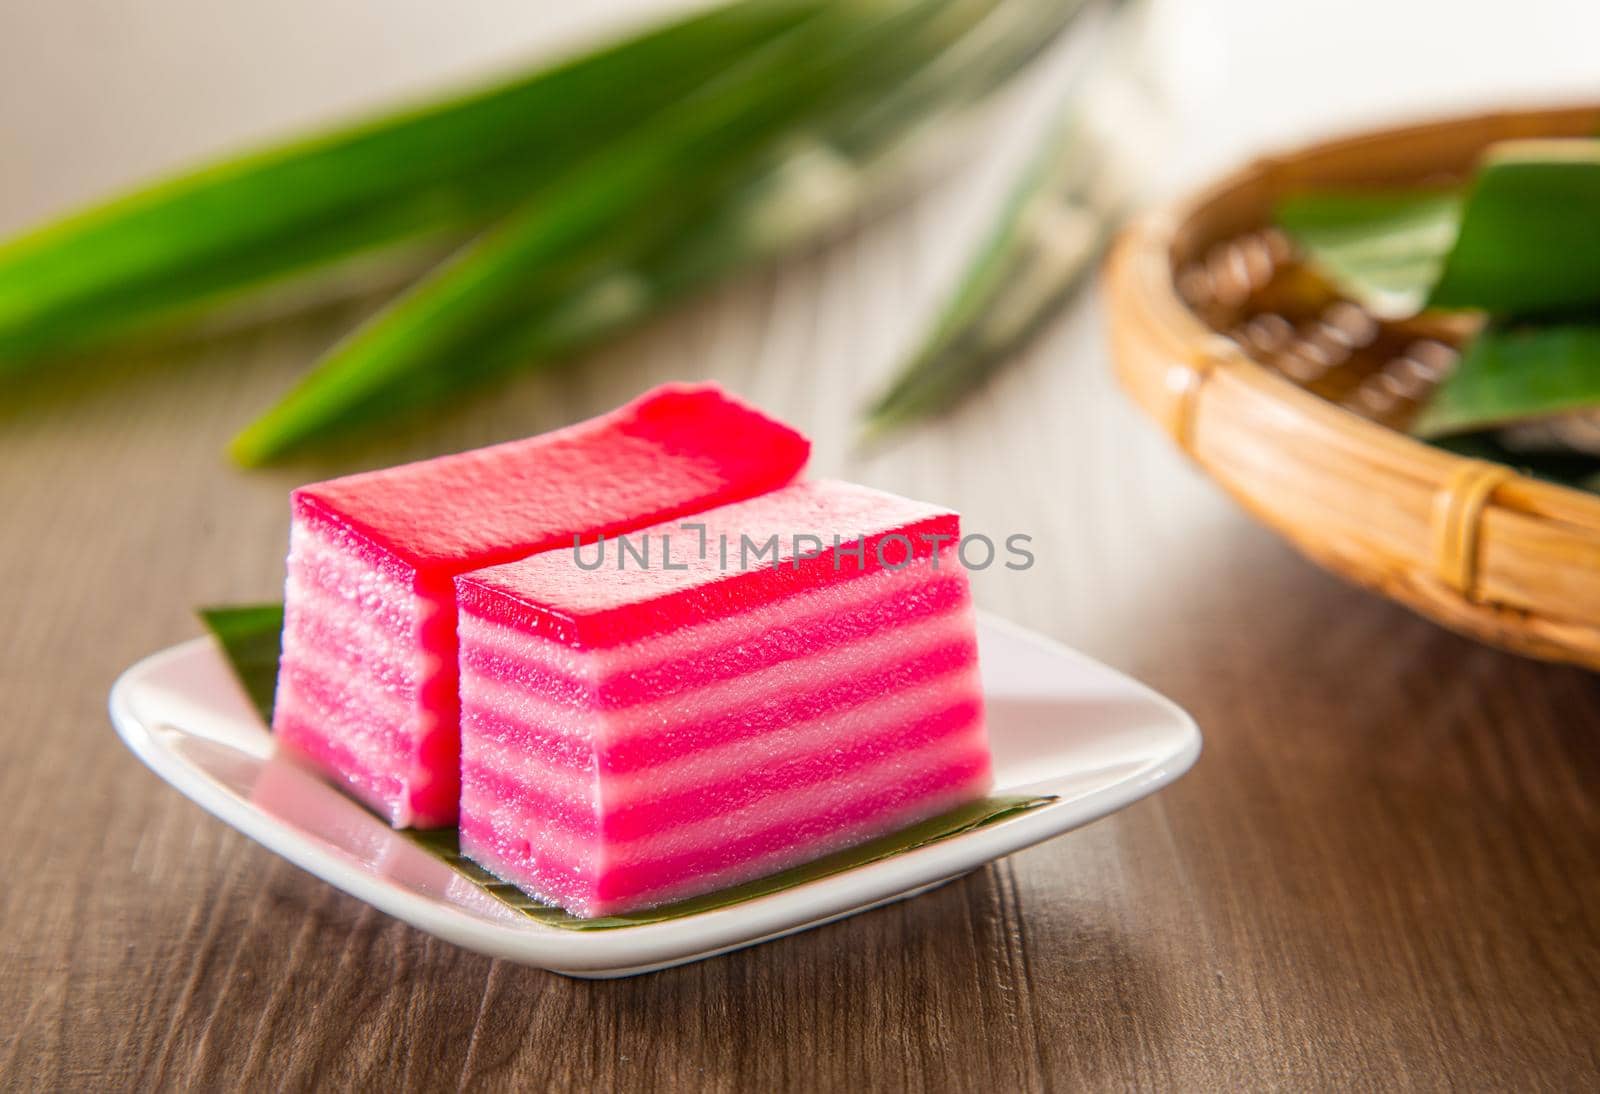 Kuih lapis is a traditional Malay nyonya sweet desert on wooden table by tehcheesiong